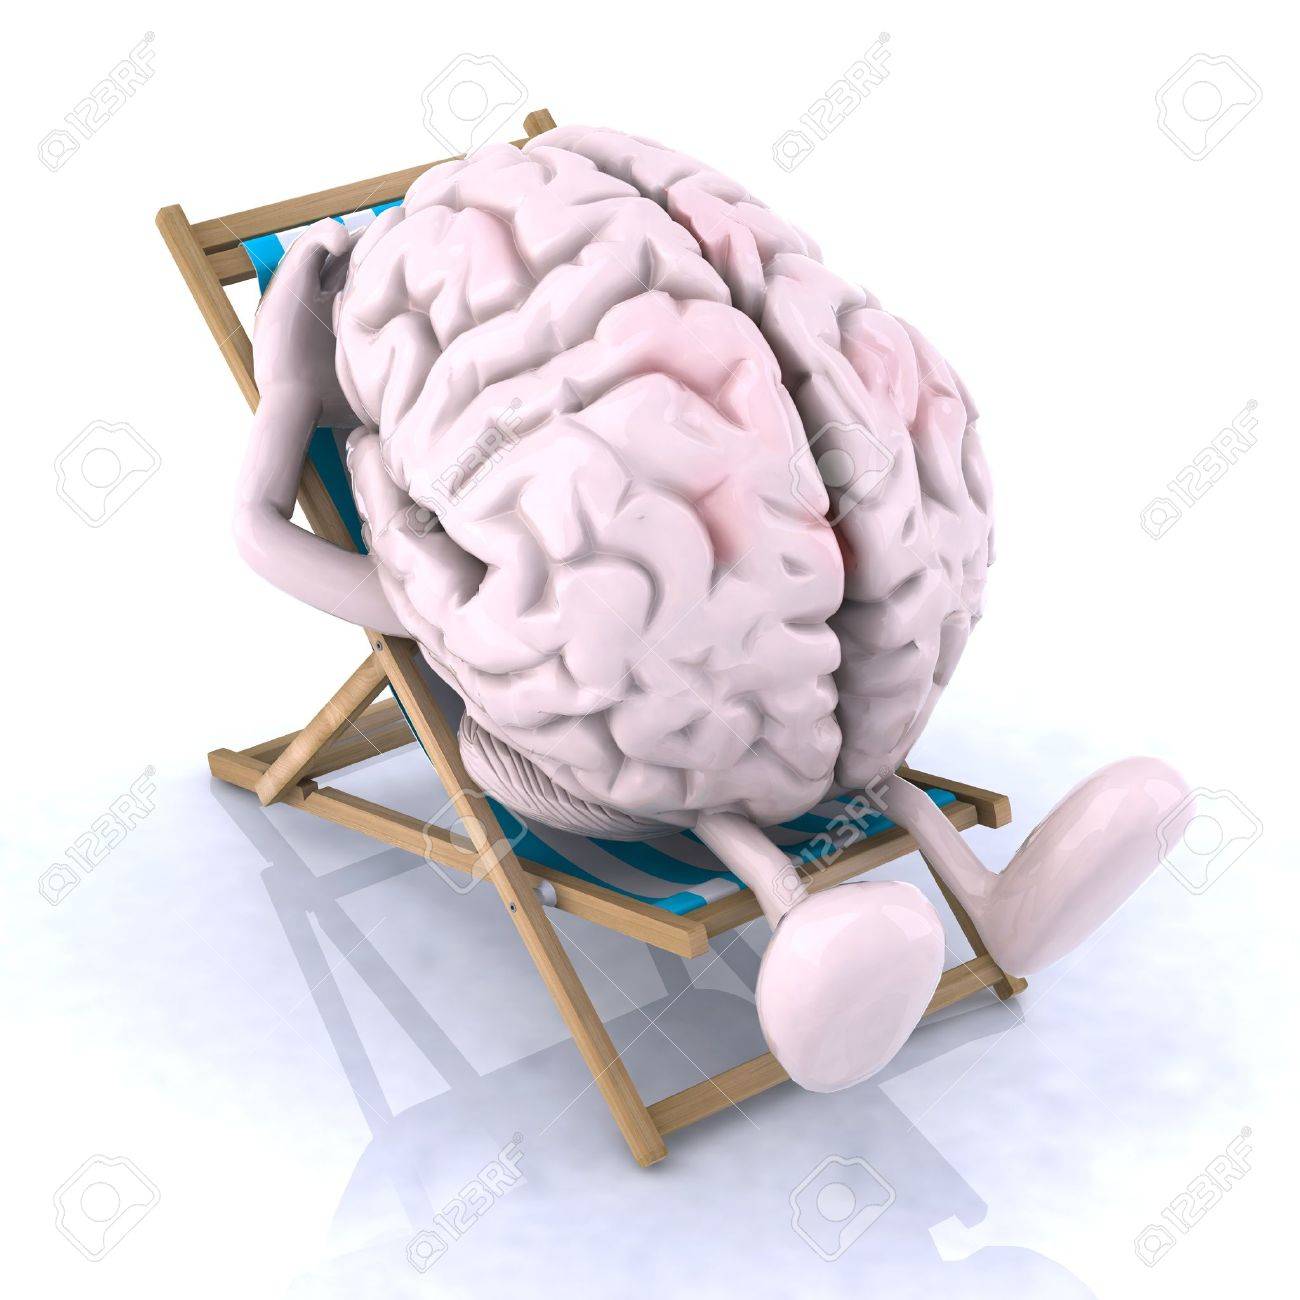 15817111-brain-that-rests-on-a-beach-chair-the-concept-of-relaxing-the-mind-Stock-Photo.jpg